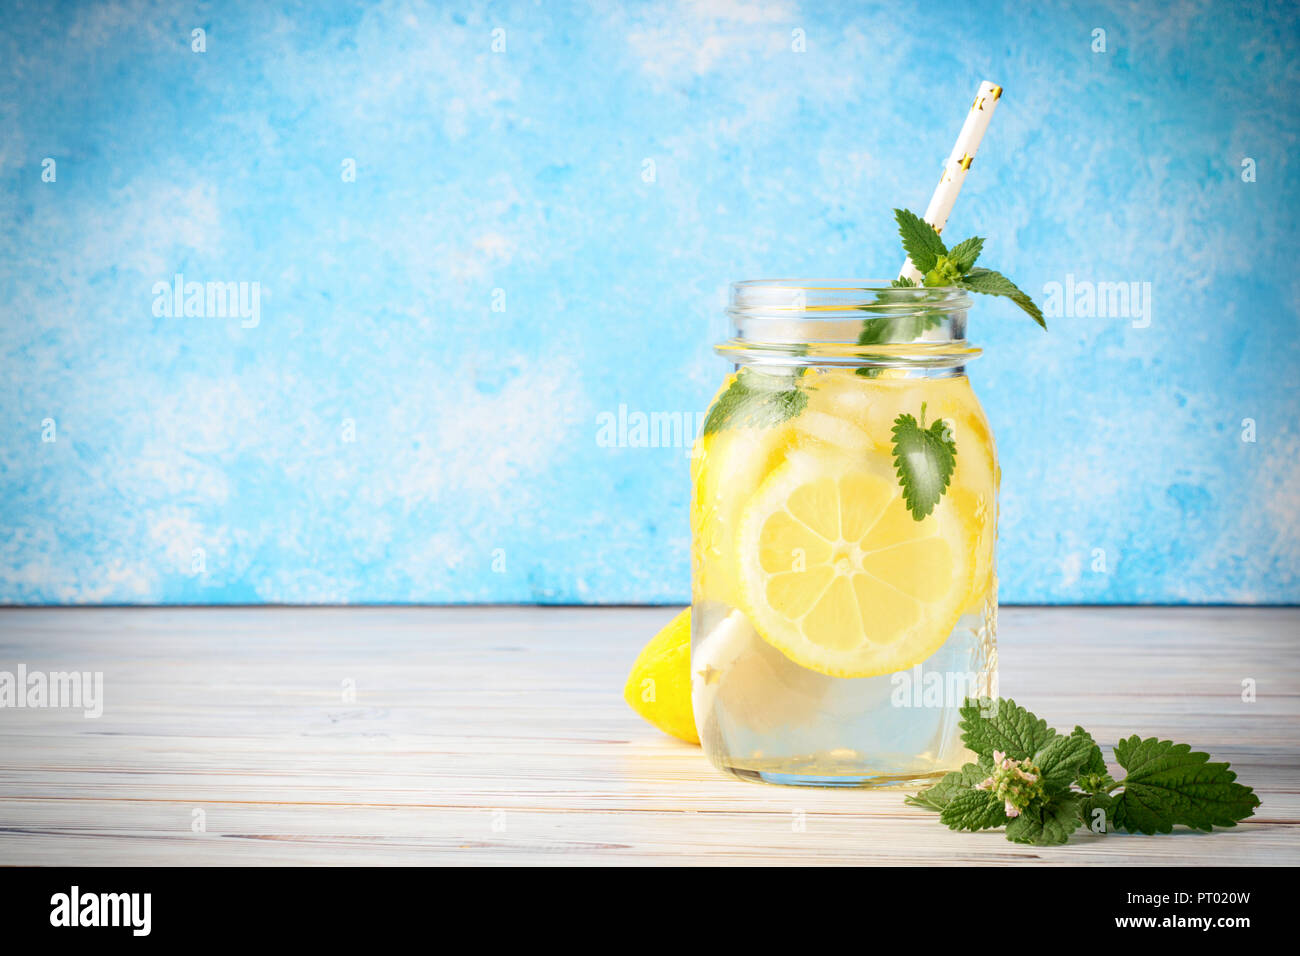 Coctail jar of lemonade and mint leaves on wooden table blue background Natural lemon water homemade food is popular detox beverage Glass of antioxidant infusion Stock Photo